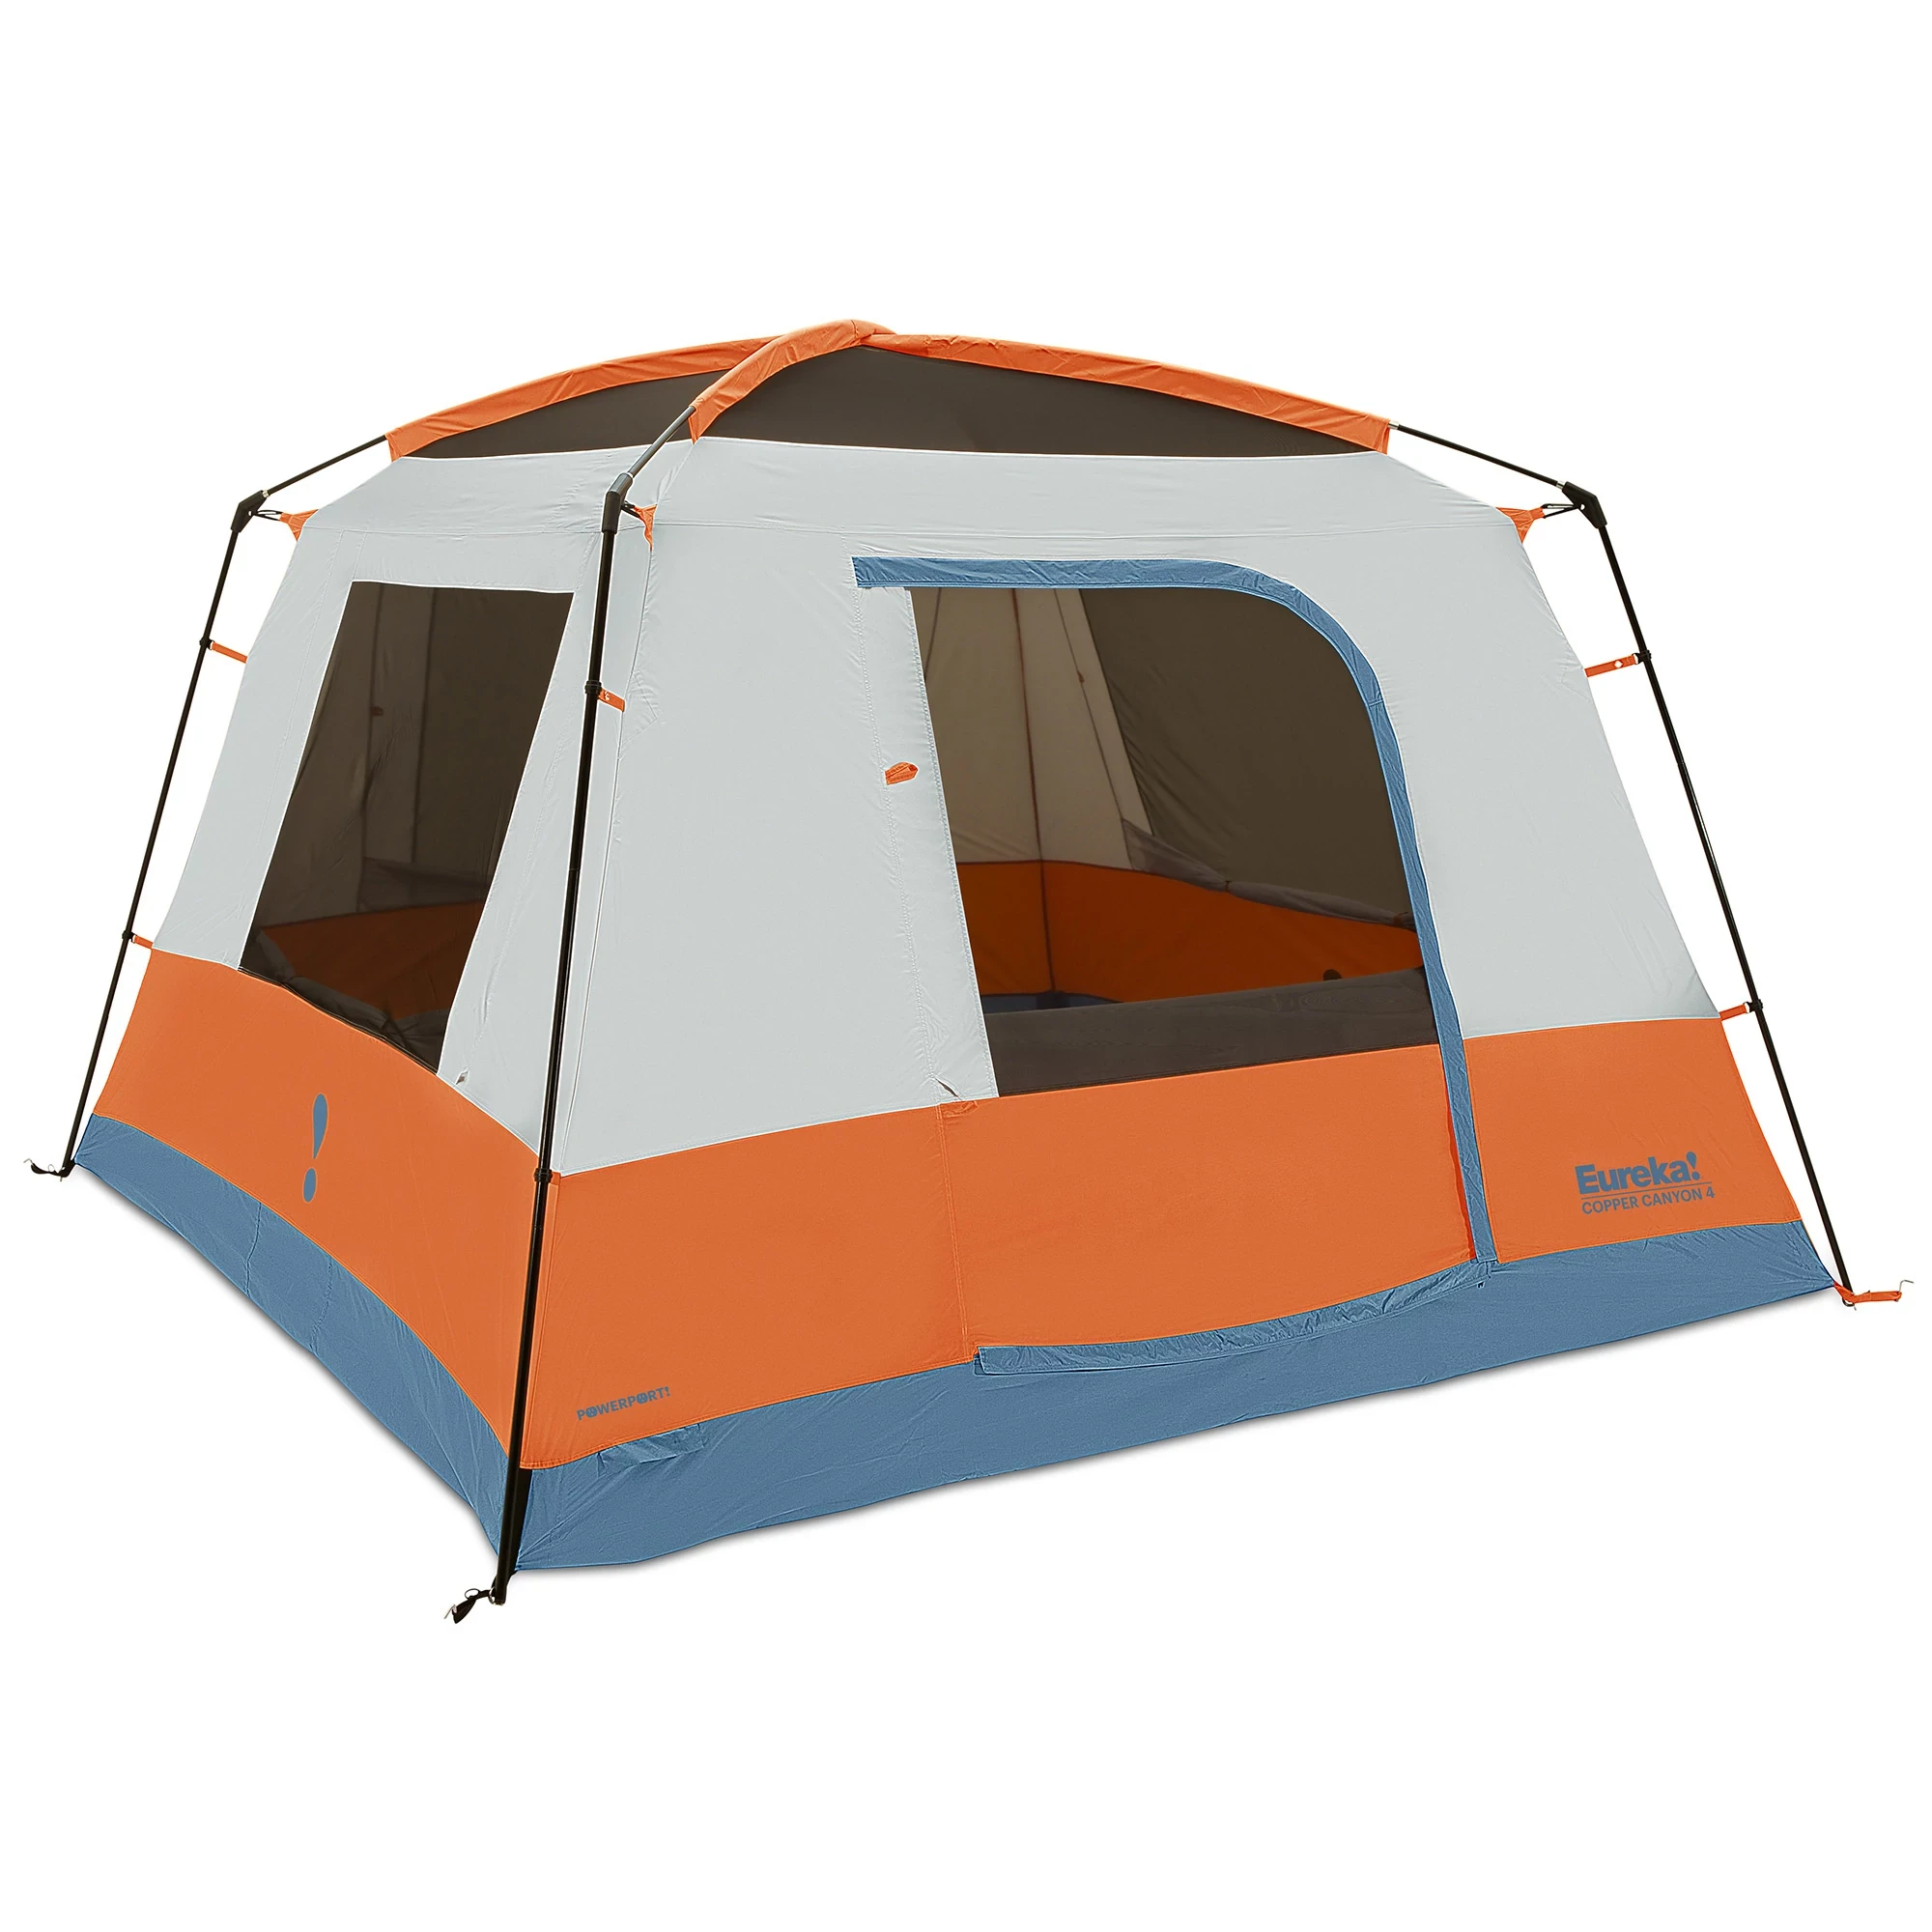 Copper Canyon LX tent without rainfly windows open